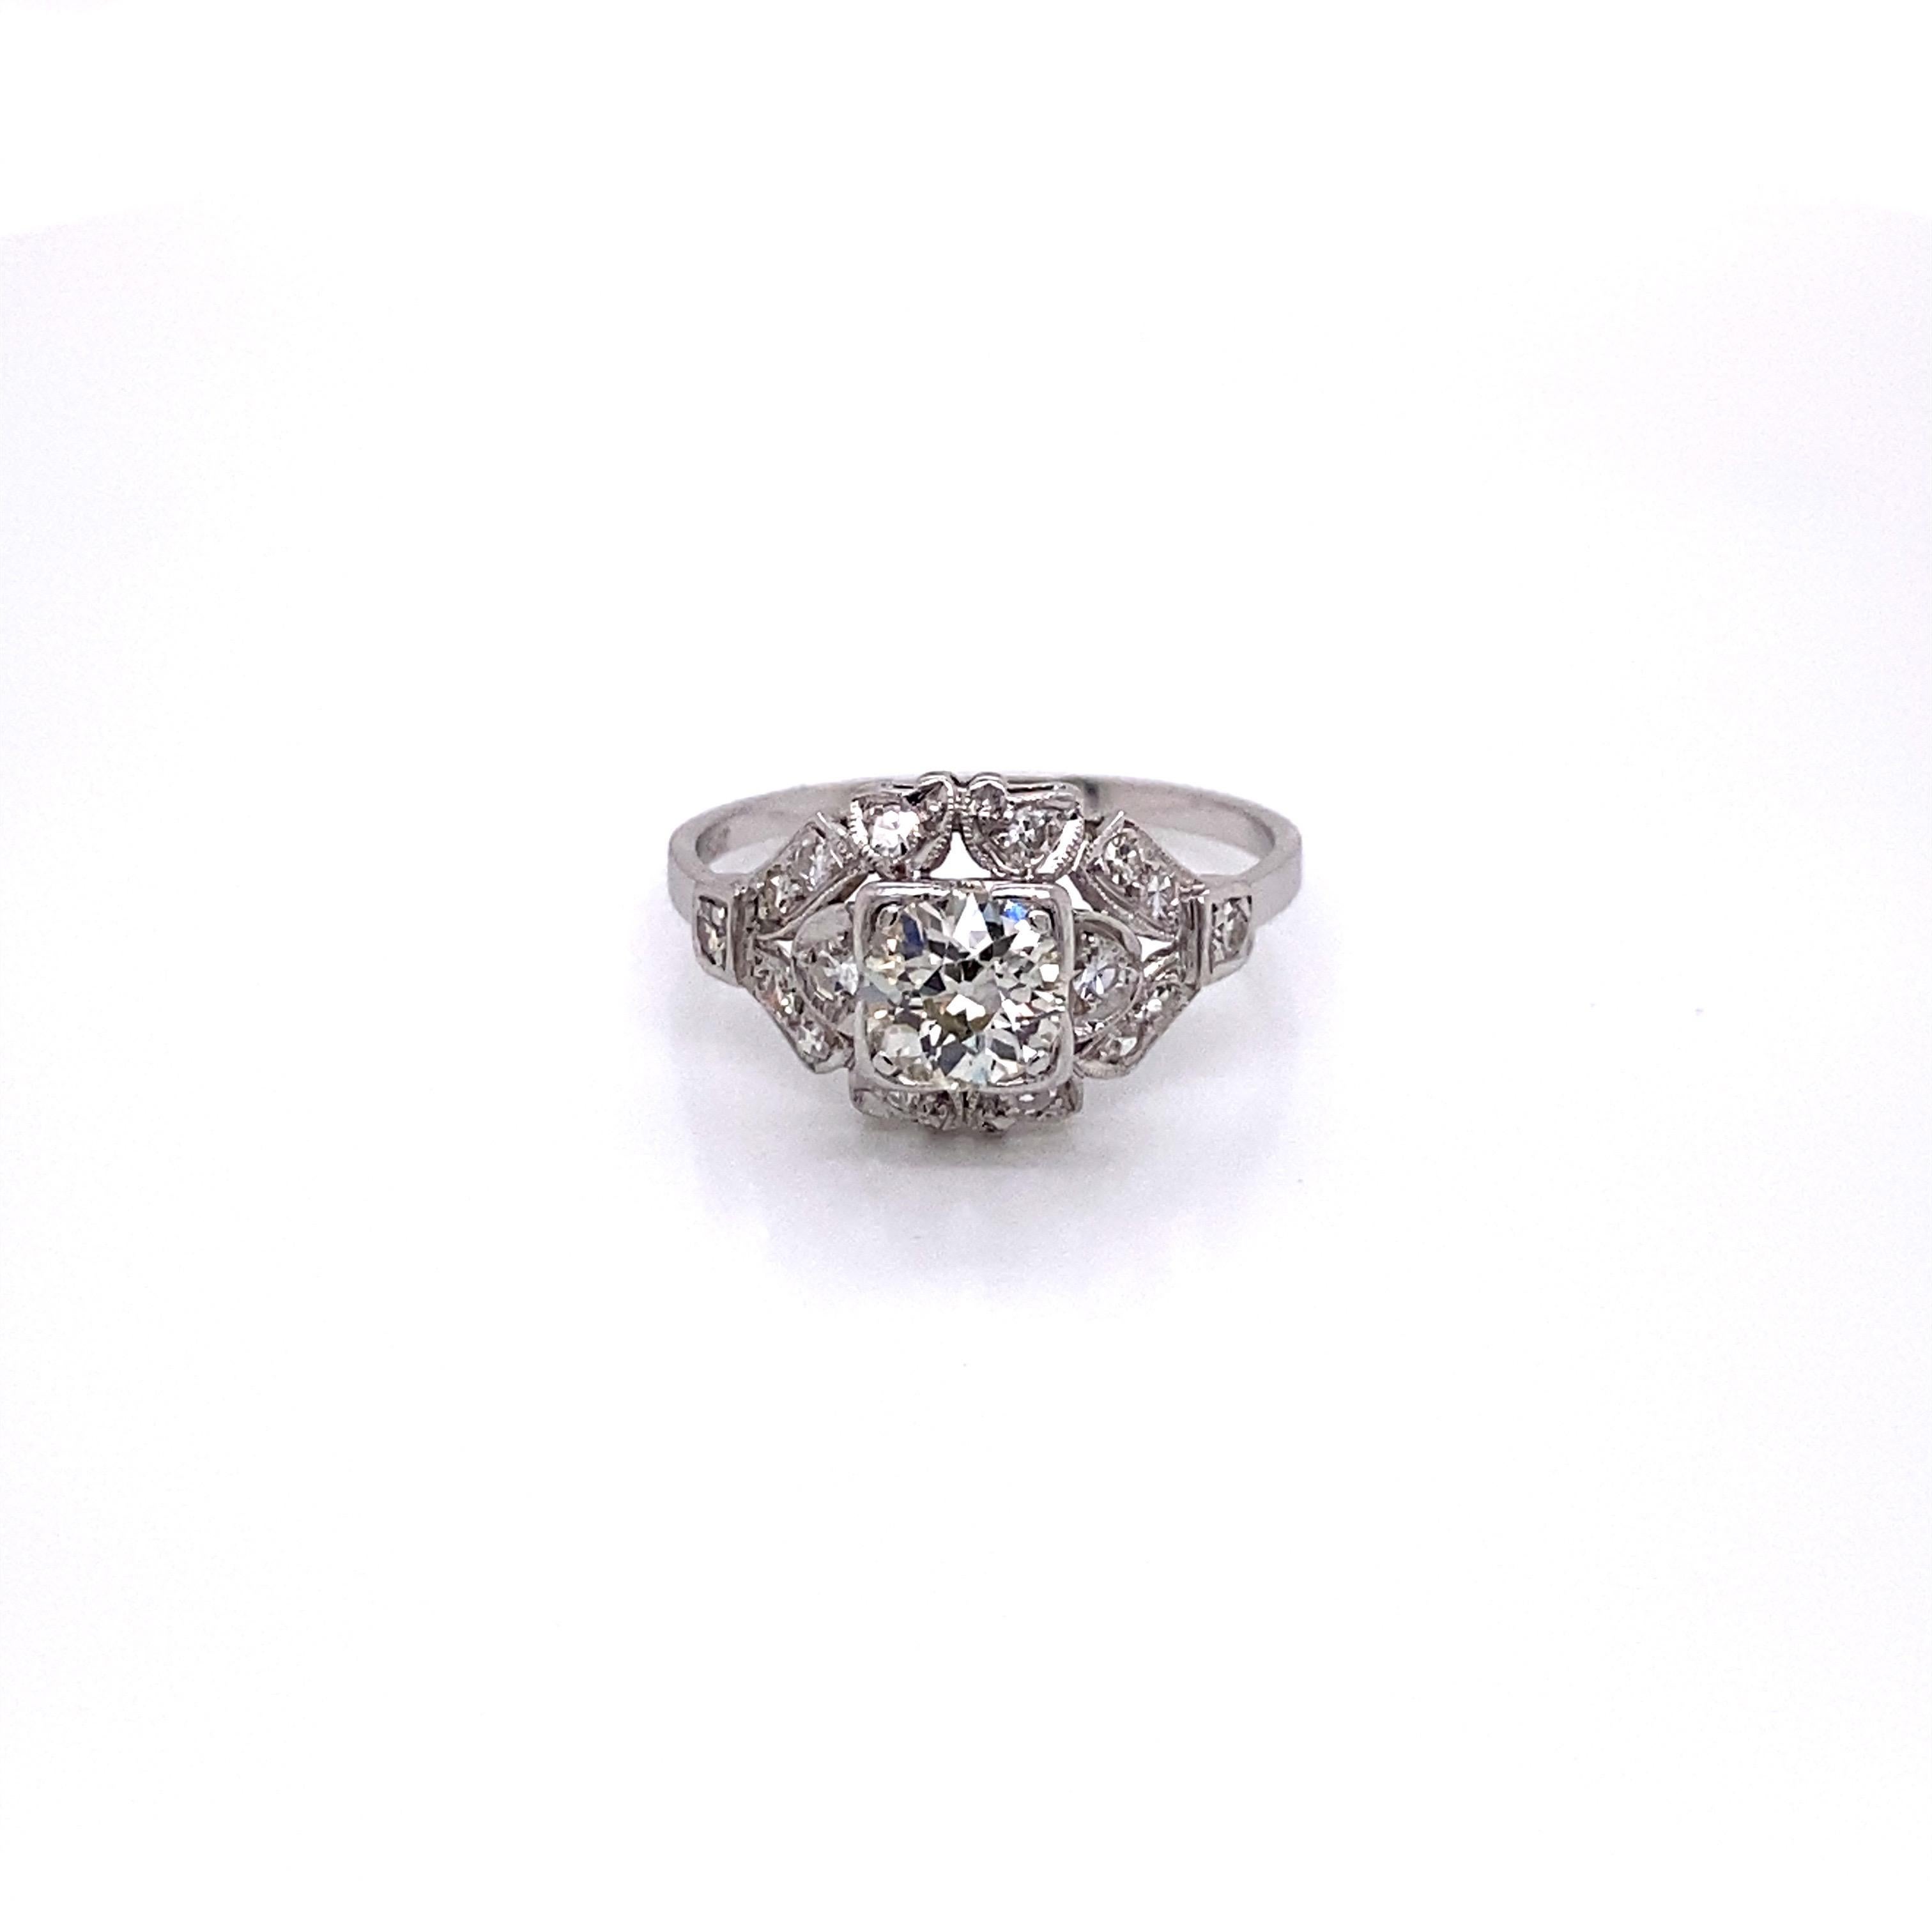 Vintage European Cut Diamond in Platinum Art Deco Ring - the center European cut diamond weighs .77ct with the quality of K color and VS2 clarity. The diamond sits low in a very detailed Art Deco platinum mounting with 16 single cut accent diamonds